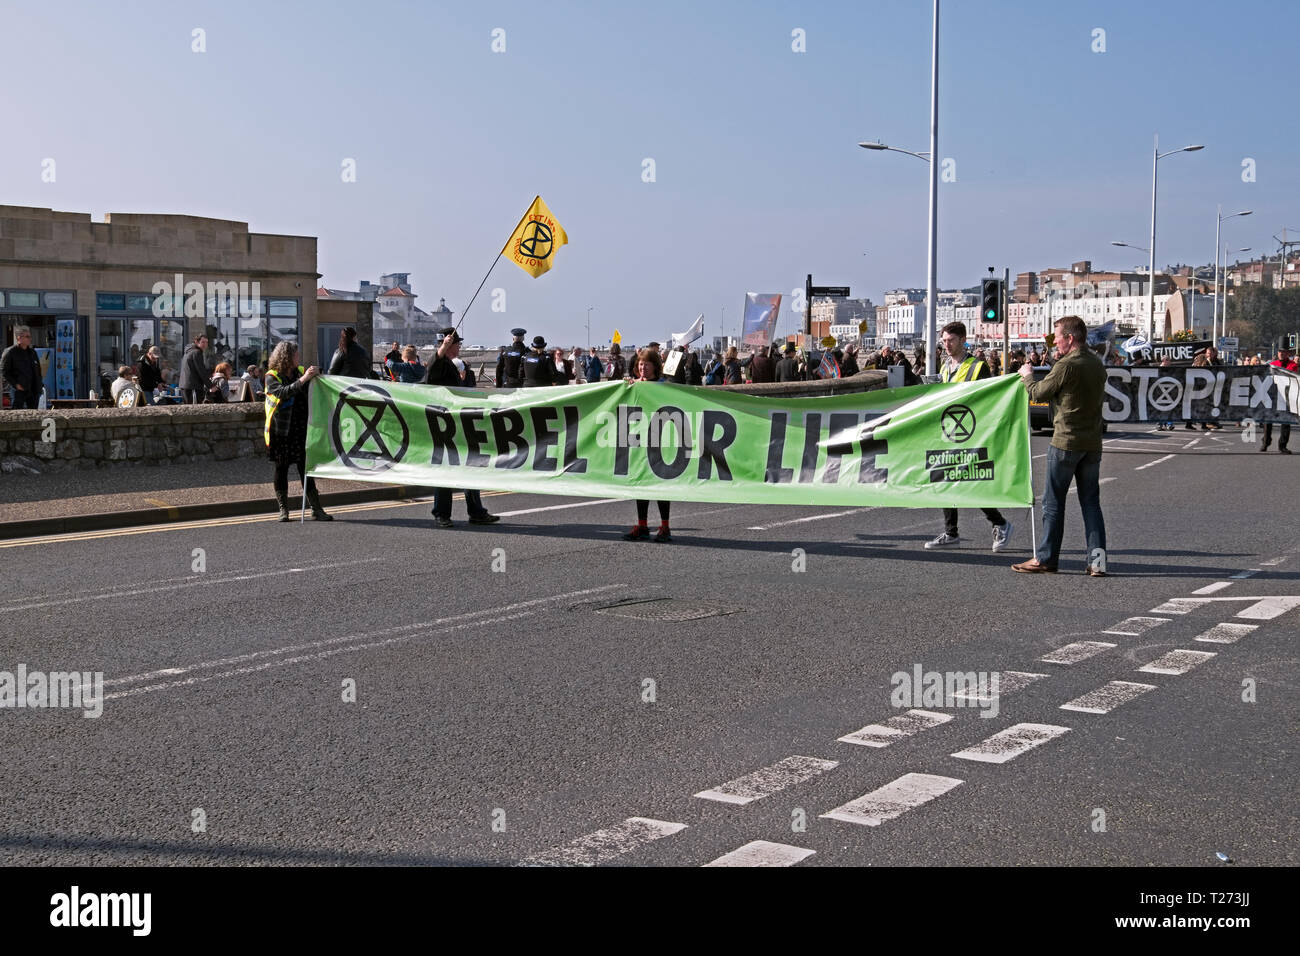 Weston-super-Mare, UK. 30th March, 2019. Protestors against climate change take part in a mock funeral. The demonstration was organised by Extinction Rebellion Weston-super-Mare. Keith Ramsey/Alamy Live News Stock Photo